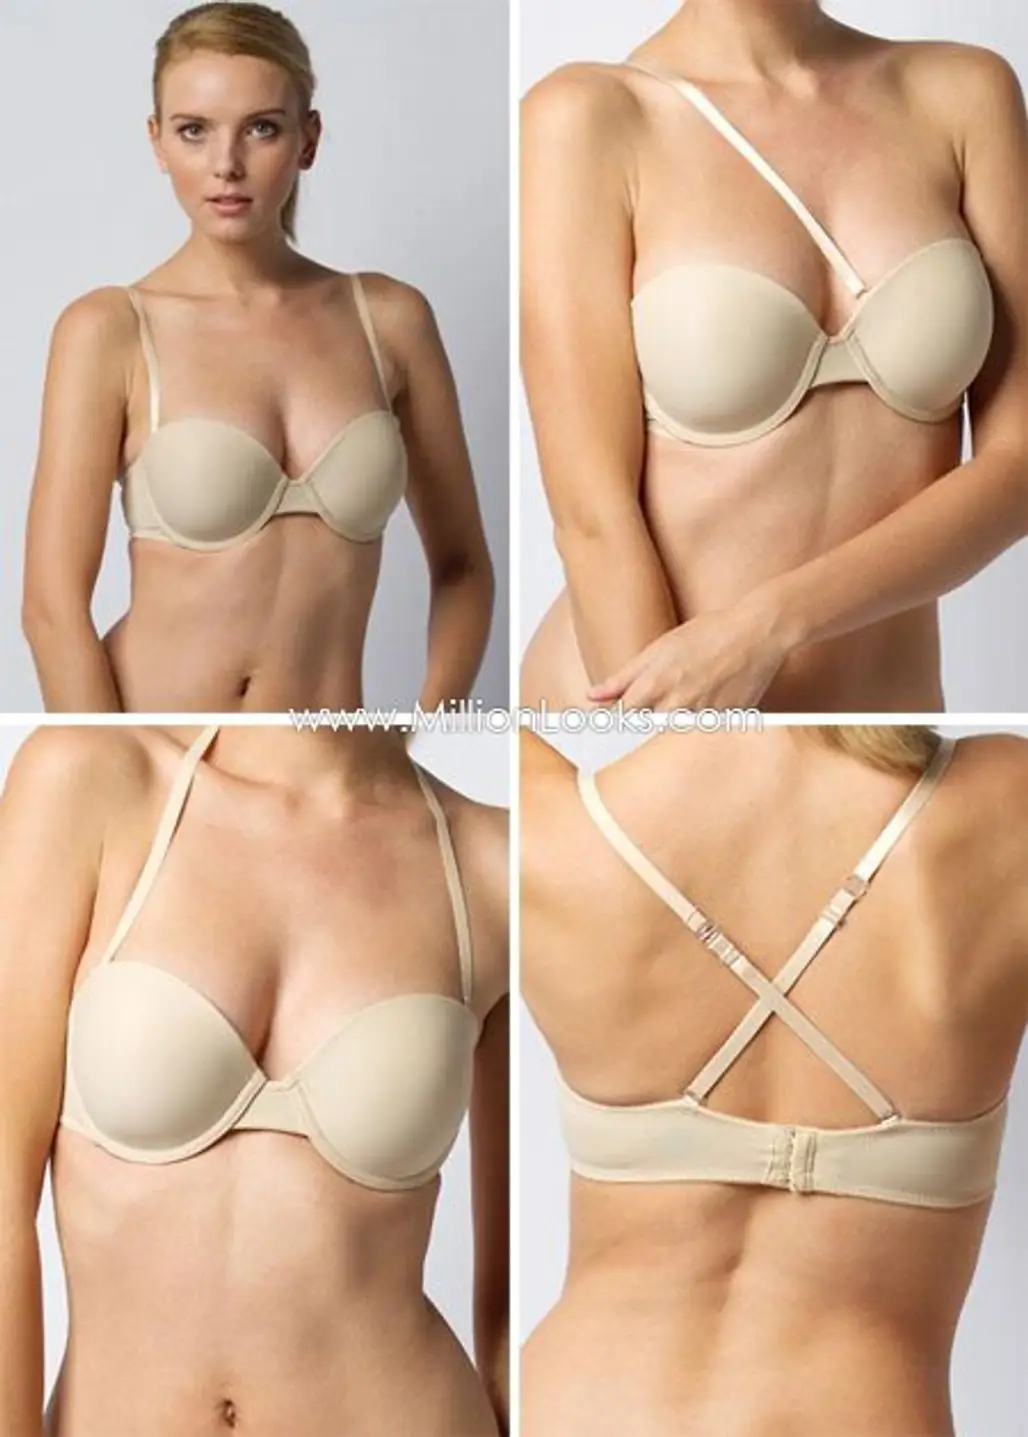 Why Are Bras so Uncomfortable?